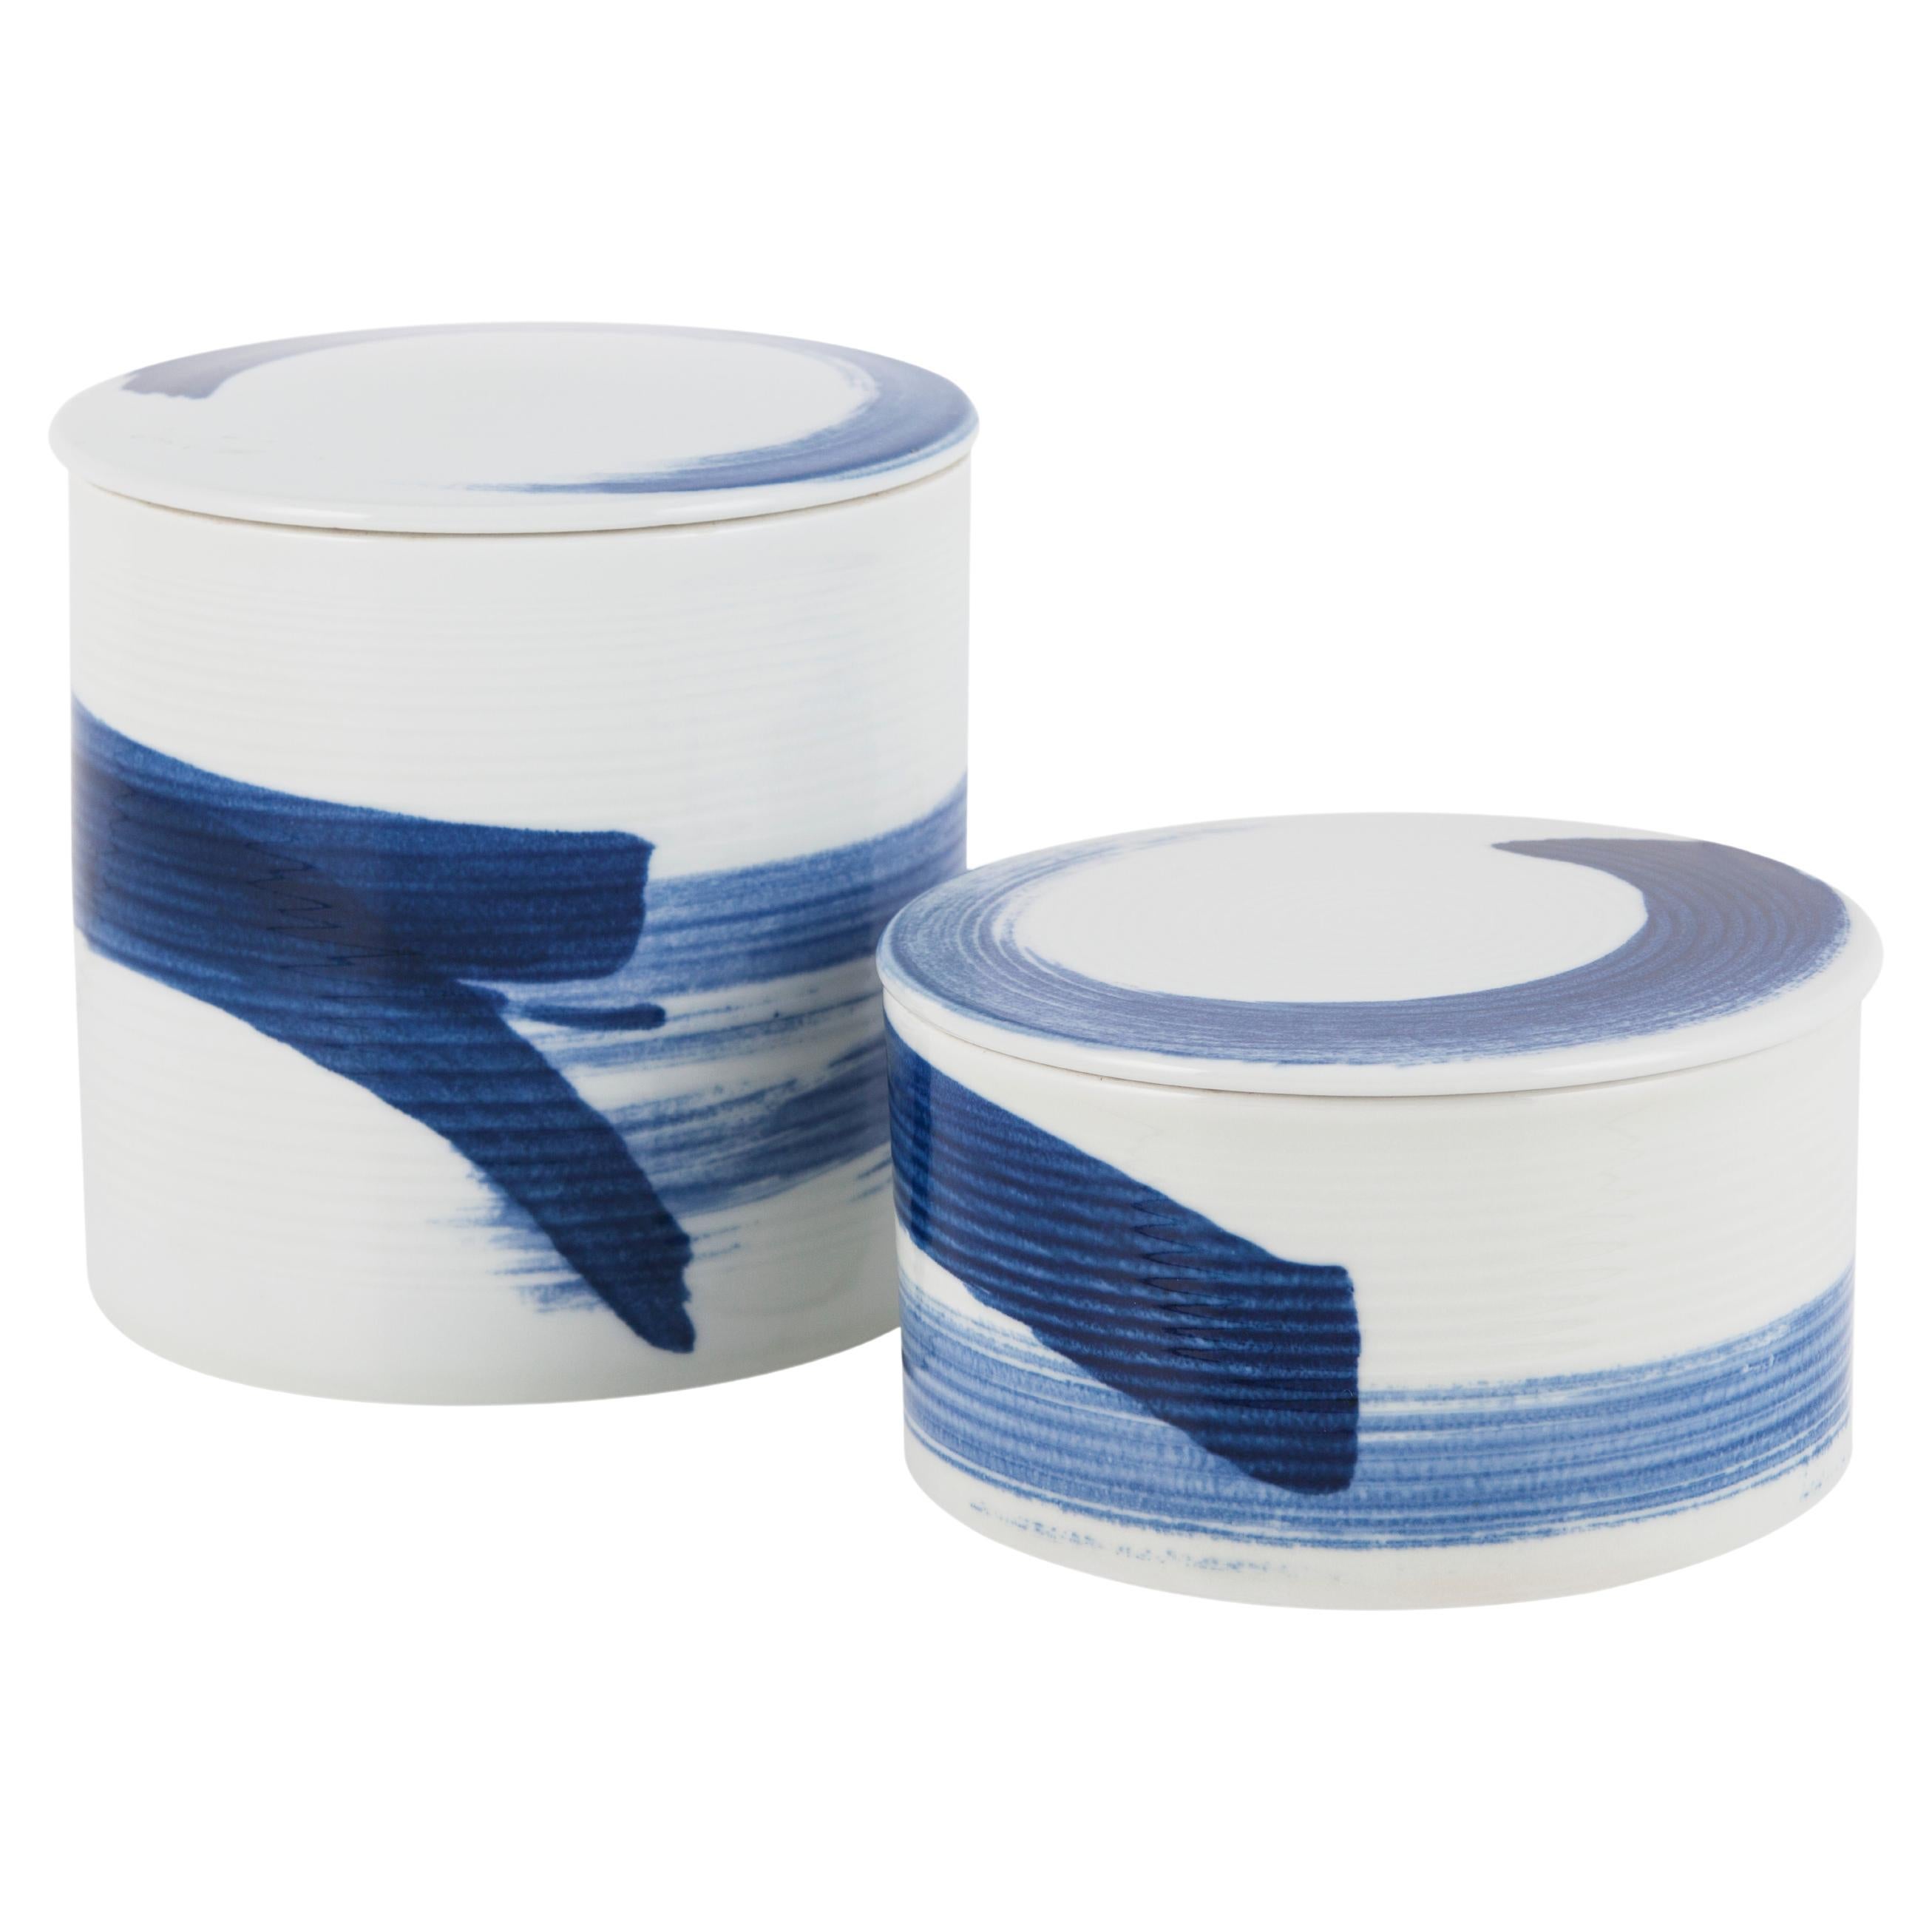 Set of 2 Porcelain Wang Pots, Blue and White, Handmolded & Handpainted For Sale